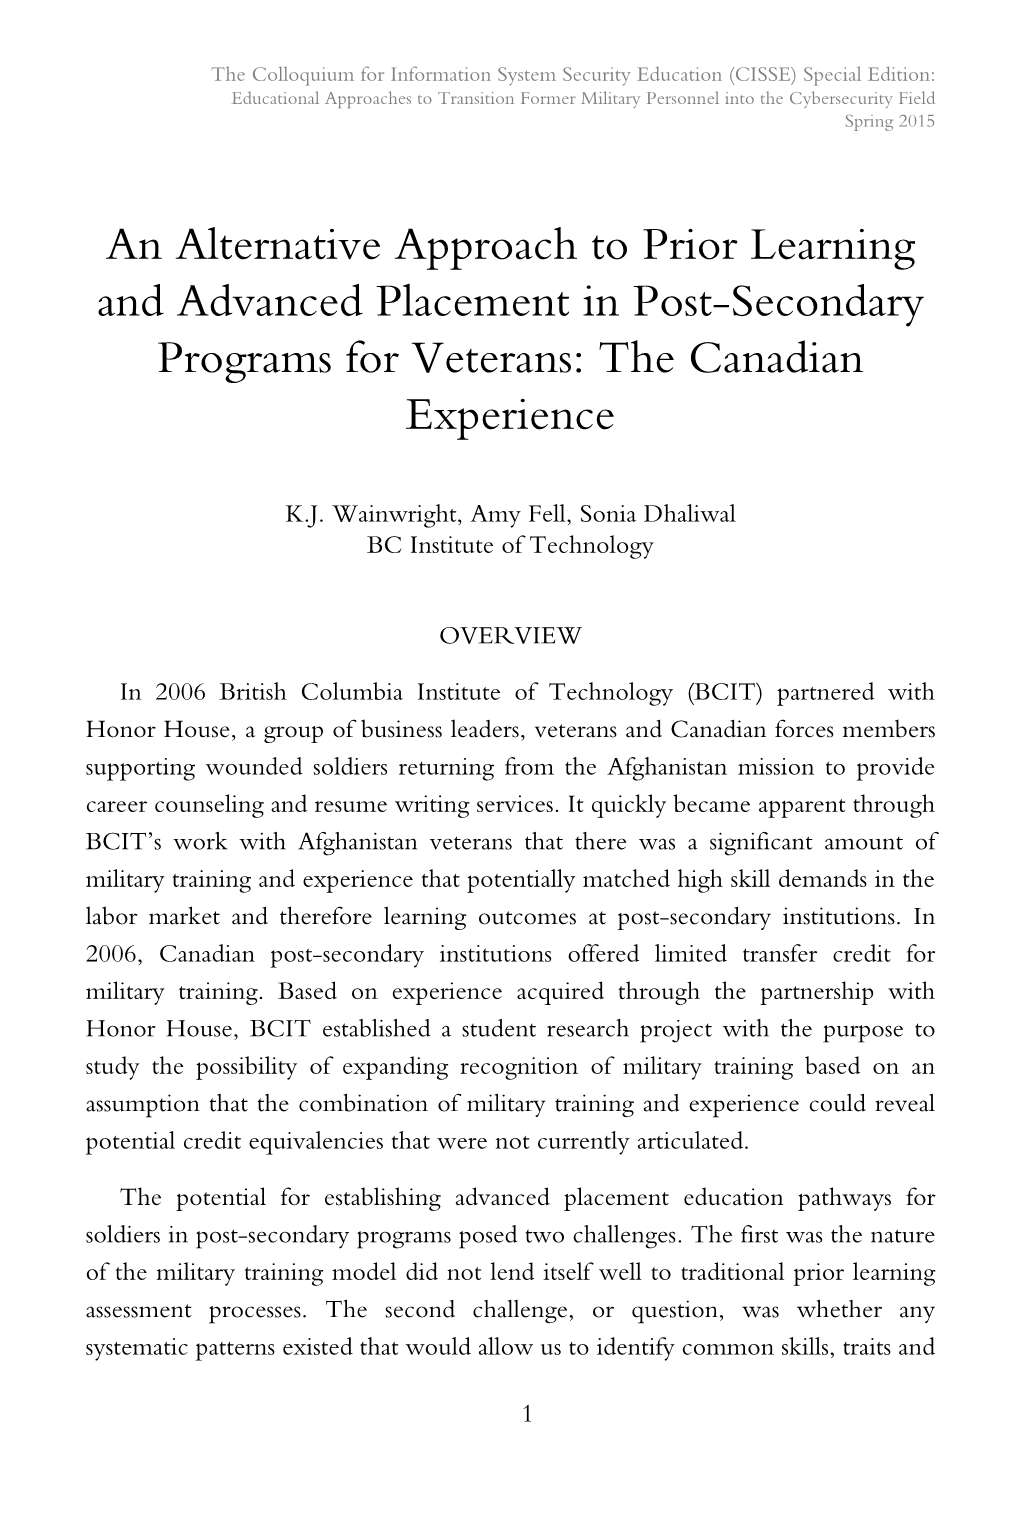 An Alternative Approach to Prior Learning and Advanced Placement in Post-Secondary Programs for Veterans: the Canadian Experience